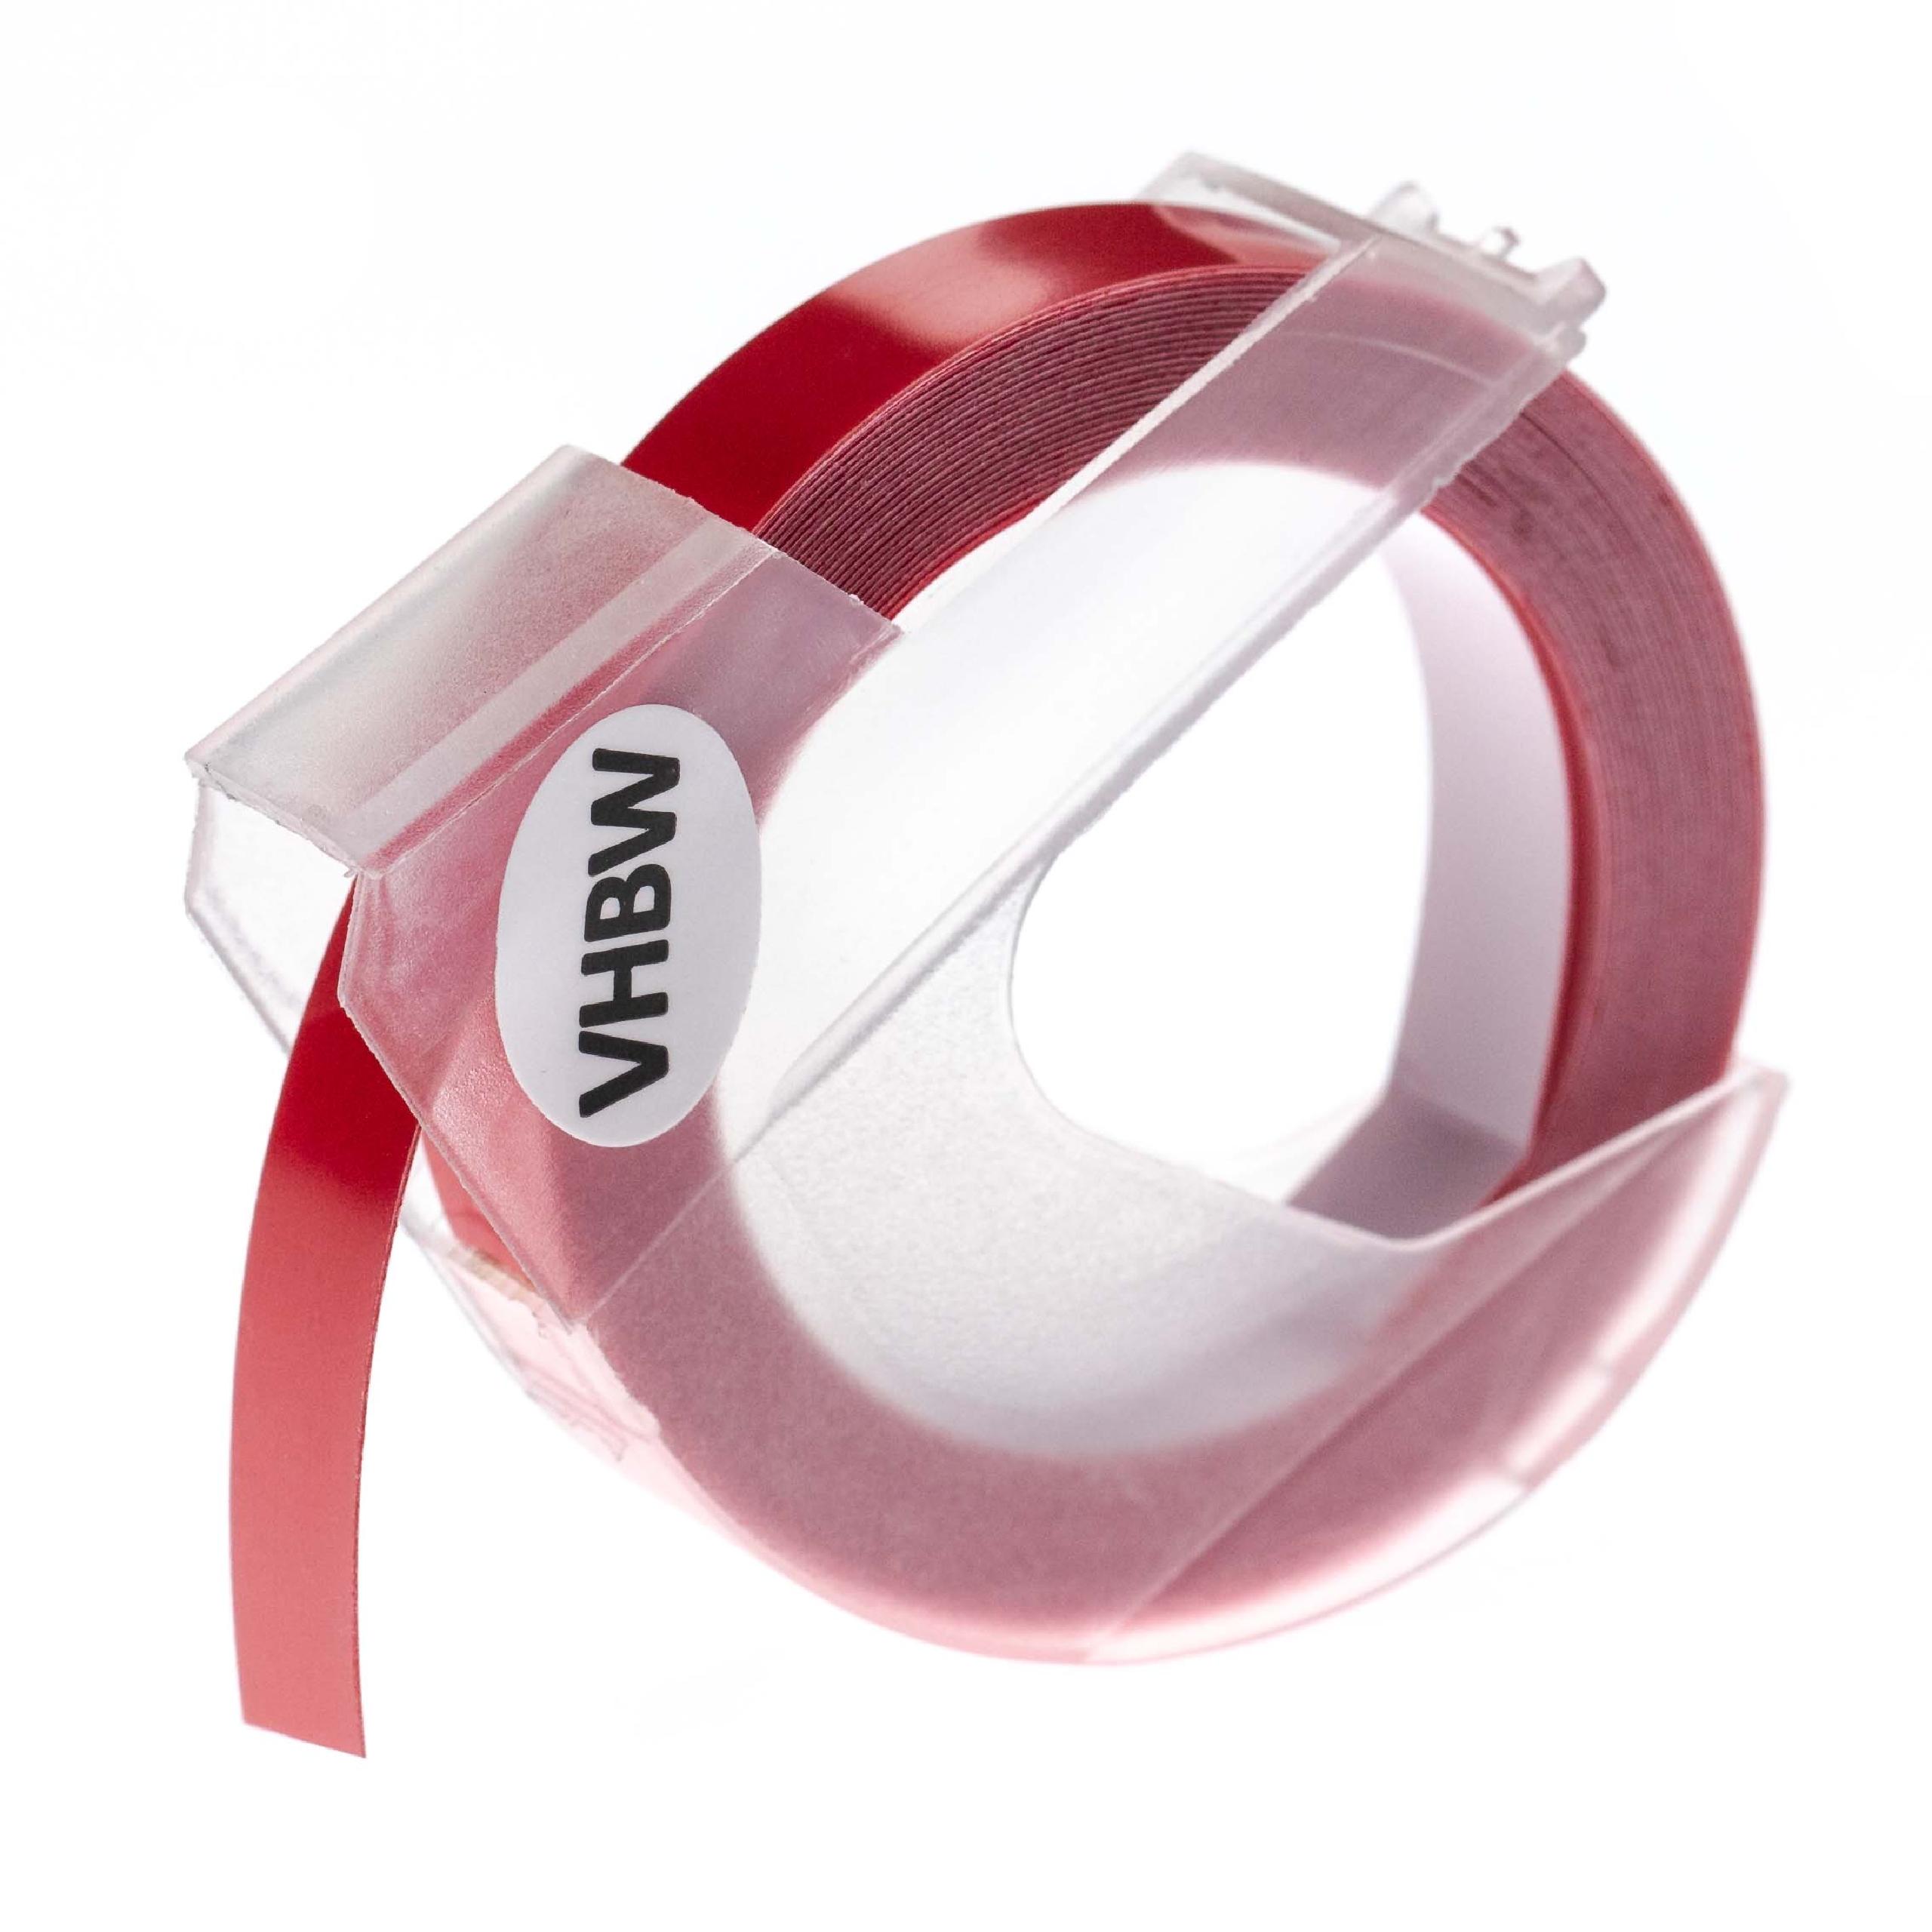 3D Embossing Label Tape as Replacement for Dymo 0898120, S0898120 - 9 mm White to Dark Pink